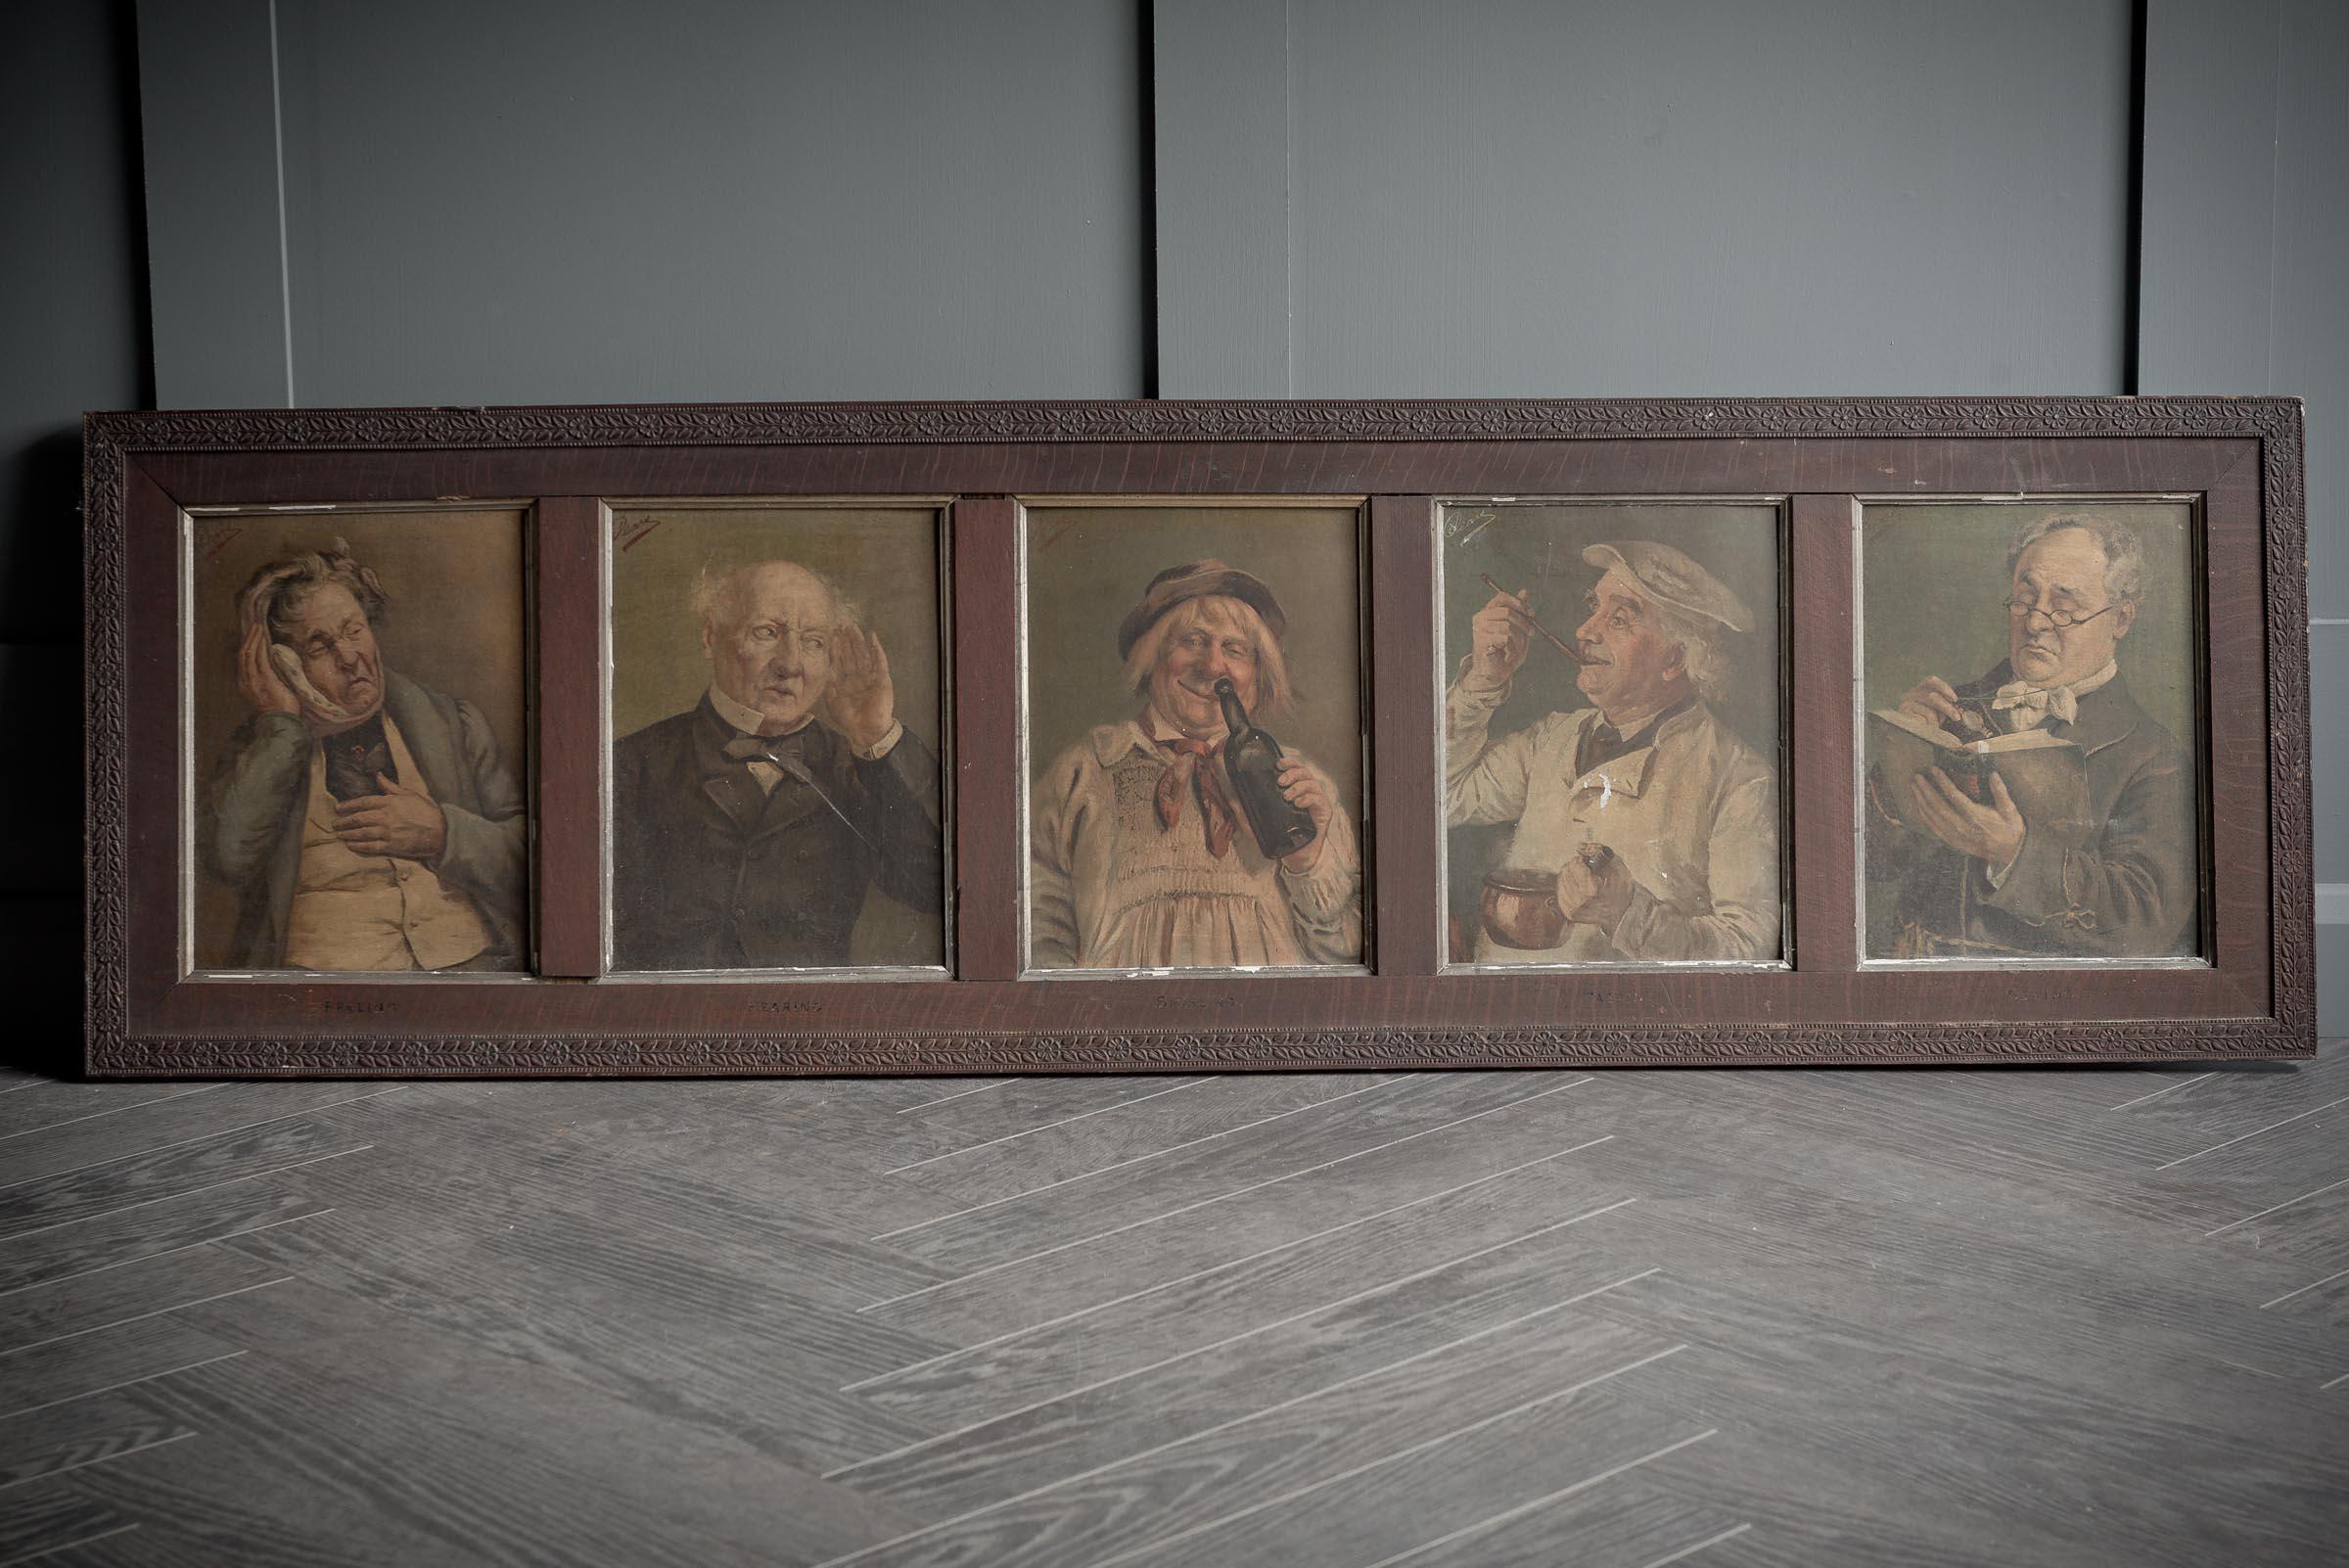 This wonderful 19th century chemist advert, by Pears, depicts 5 men with different ailments affecting their: feeling, hearing, seeing, smelling and tasting. These are engraved on the original wooden frame which is also stamped by the framers' from